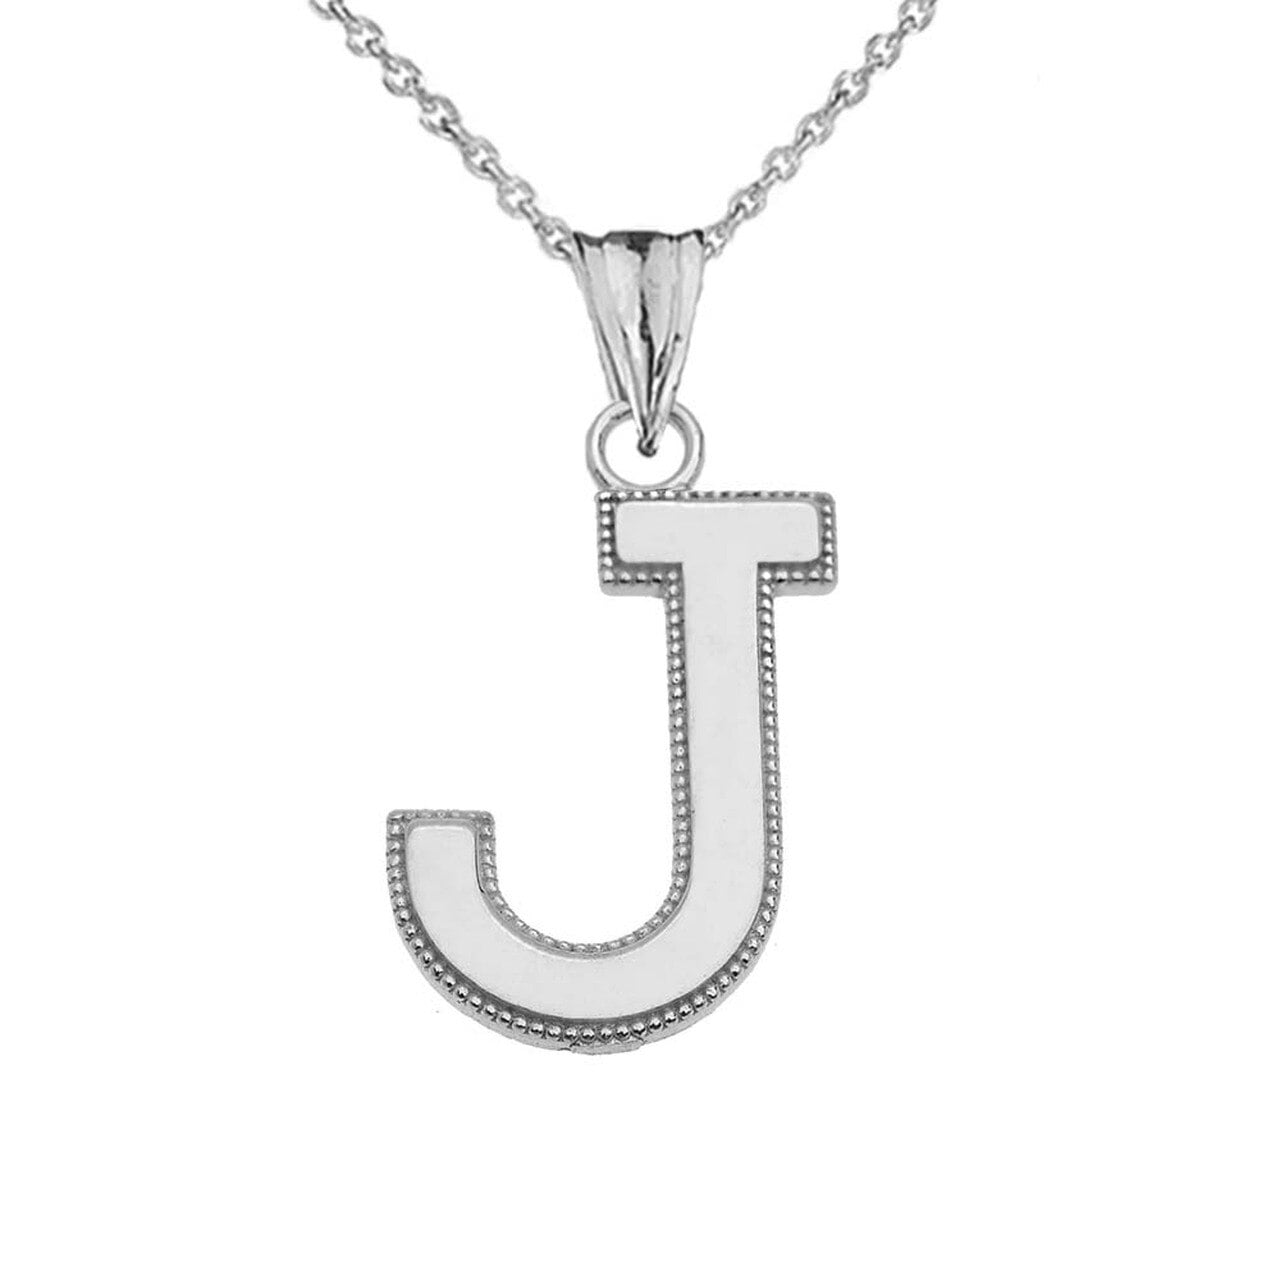 Personalized Sterling Silver Milgrain Initial Pendant Necklace